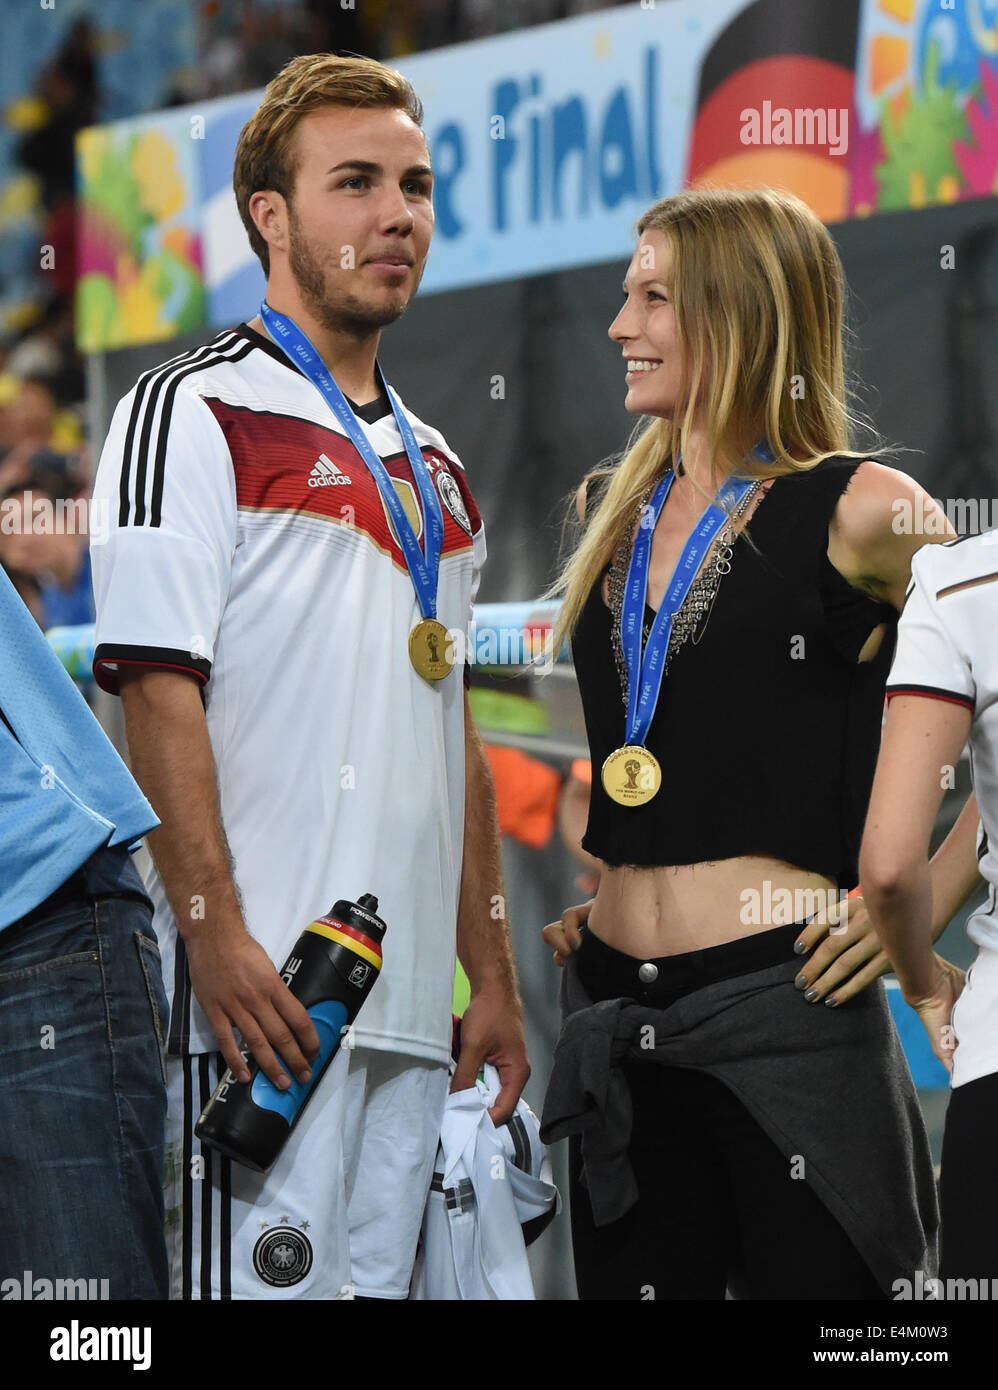 Rio de Janeiro, Brazil. 13th July, 2014. Mario Goetze and Sarah Brandner, girl friend of Bastian Schweinsteiger, after winning the FIFA World Cup 2014 final soccer match between Germany and Argentina at the Estadio do Maracana in Rio de Janeiro, Brazil, 13 July 2014. Photo: Andreas Gebert/dpa/Alamy Live News Stock Photo